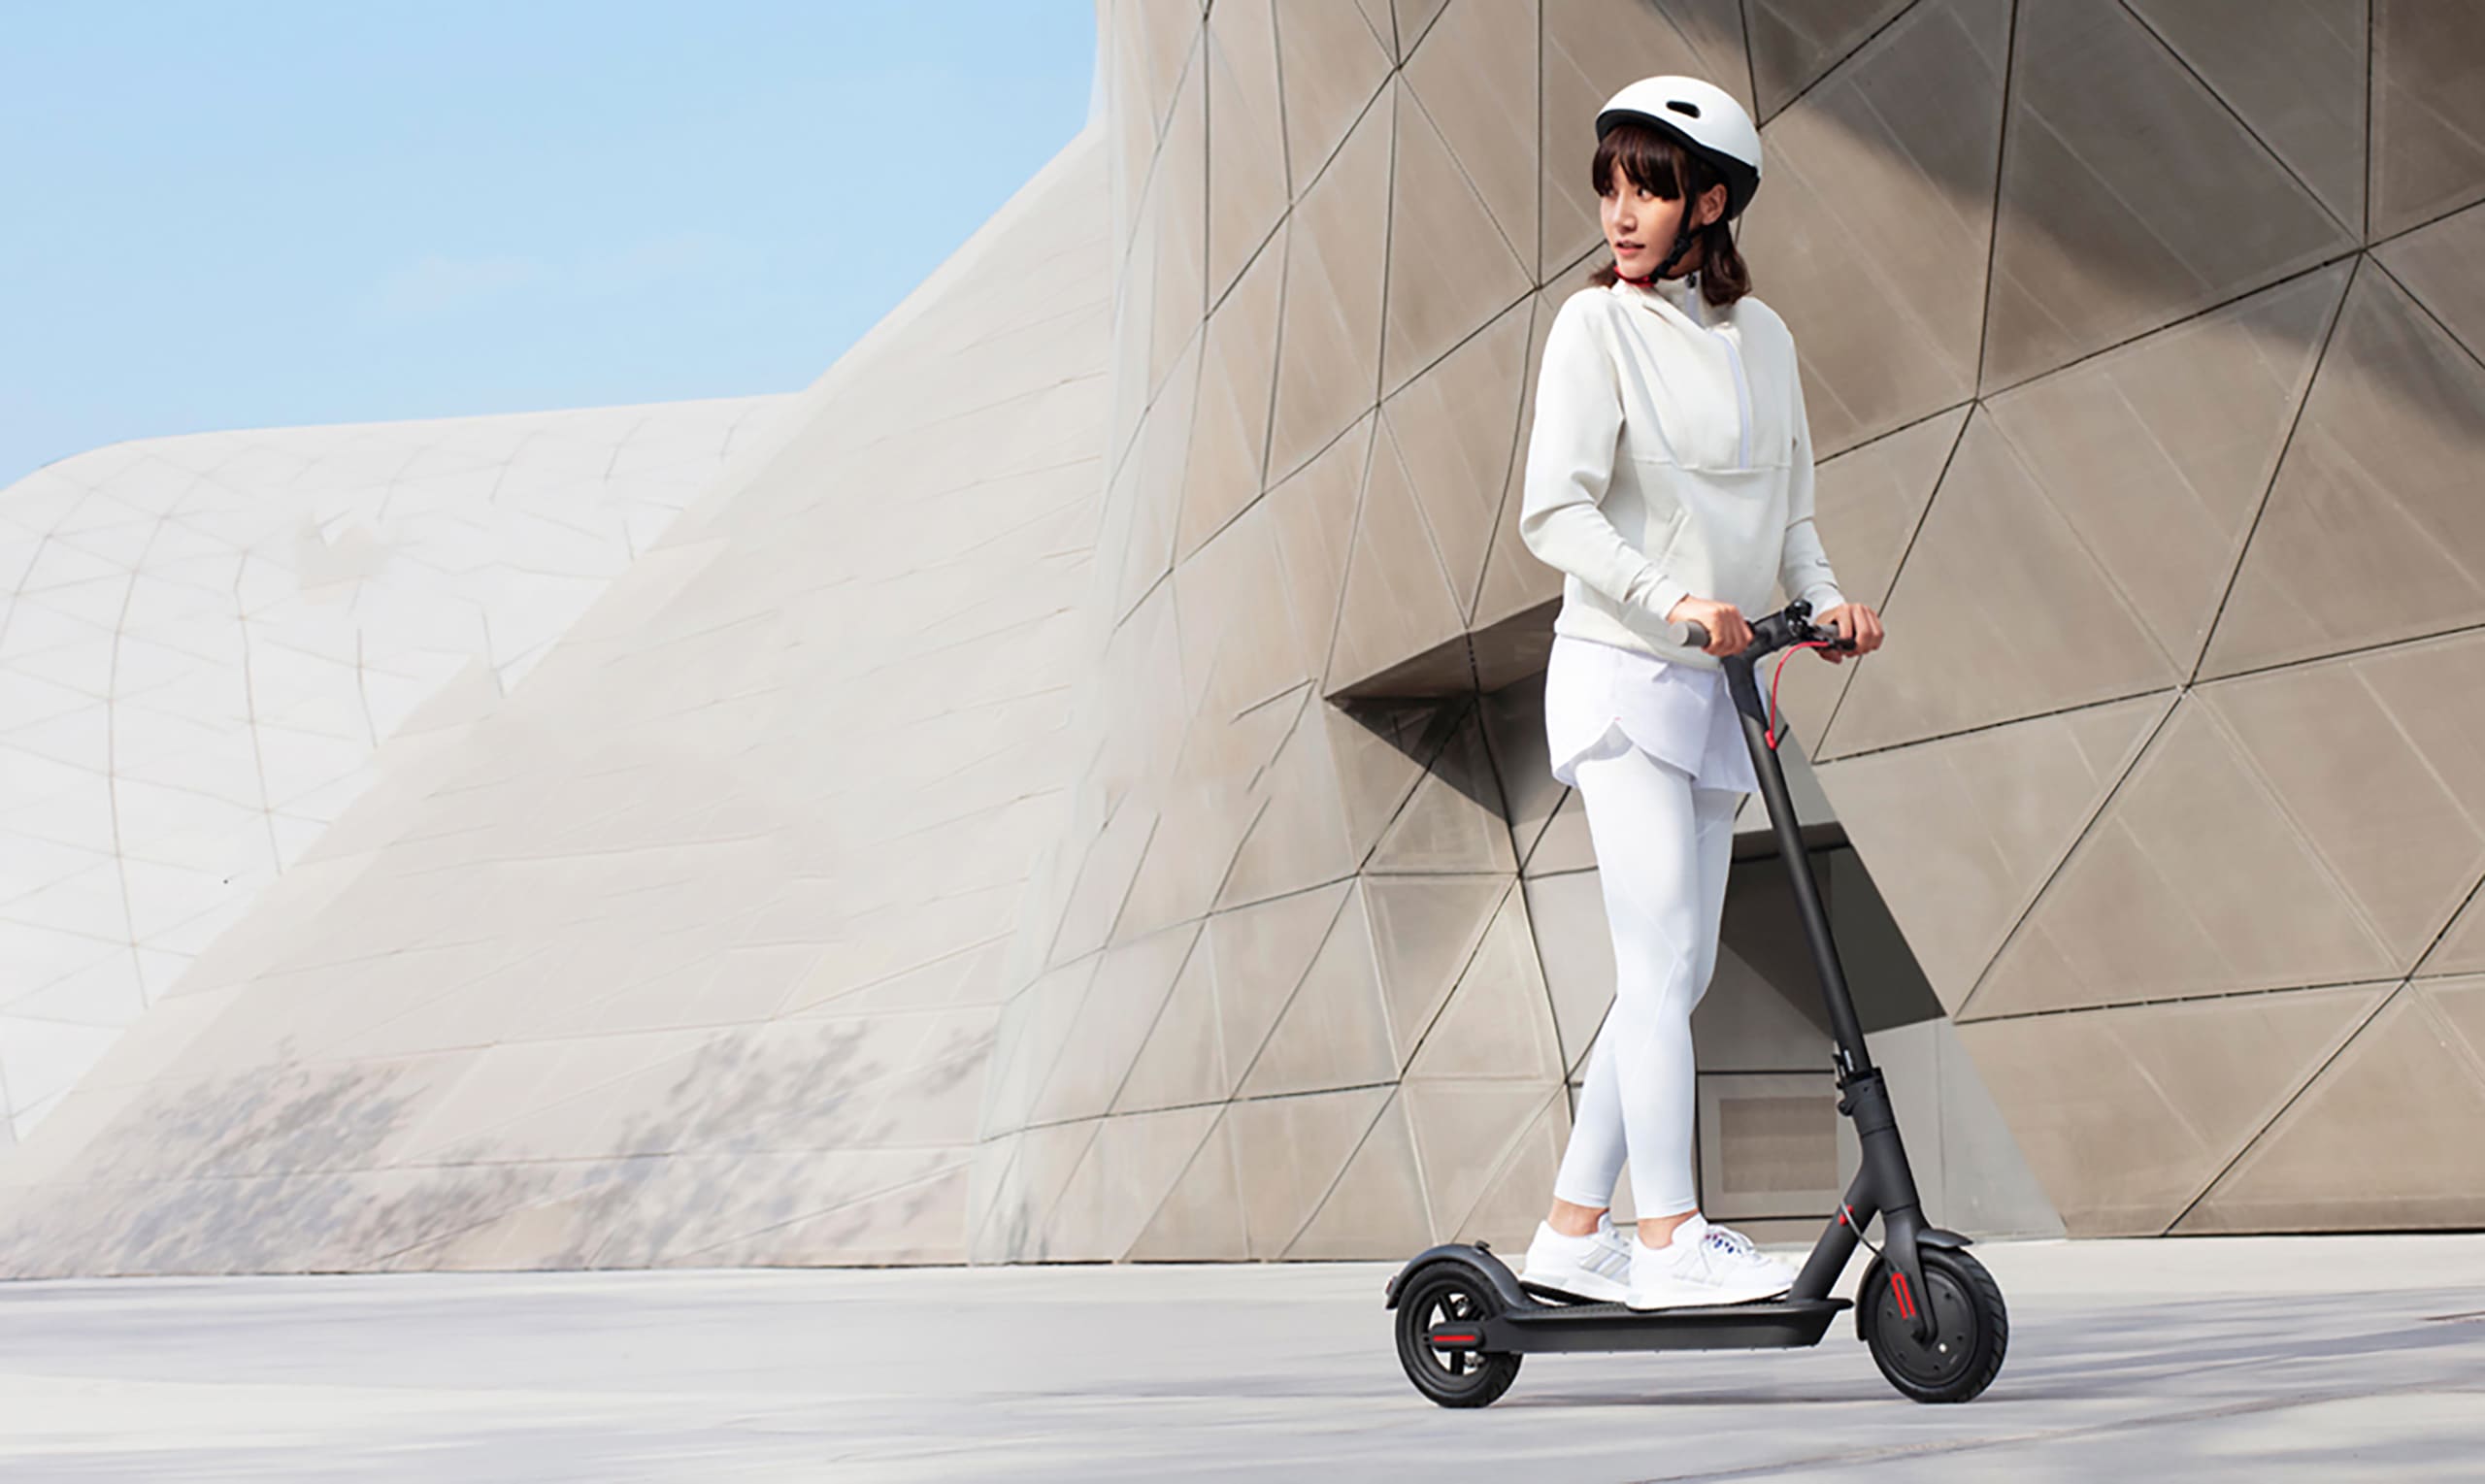 Xiaomi mijia electric scooter 1s. Электросамокат Xiaomi Mijia Electric Scooter 1s. Xiaomi 1s самокат. Электросамокат Xiaomi mi Electric Scooter 1s, Black. Электросамокат Xiaomi 1s белый.